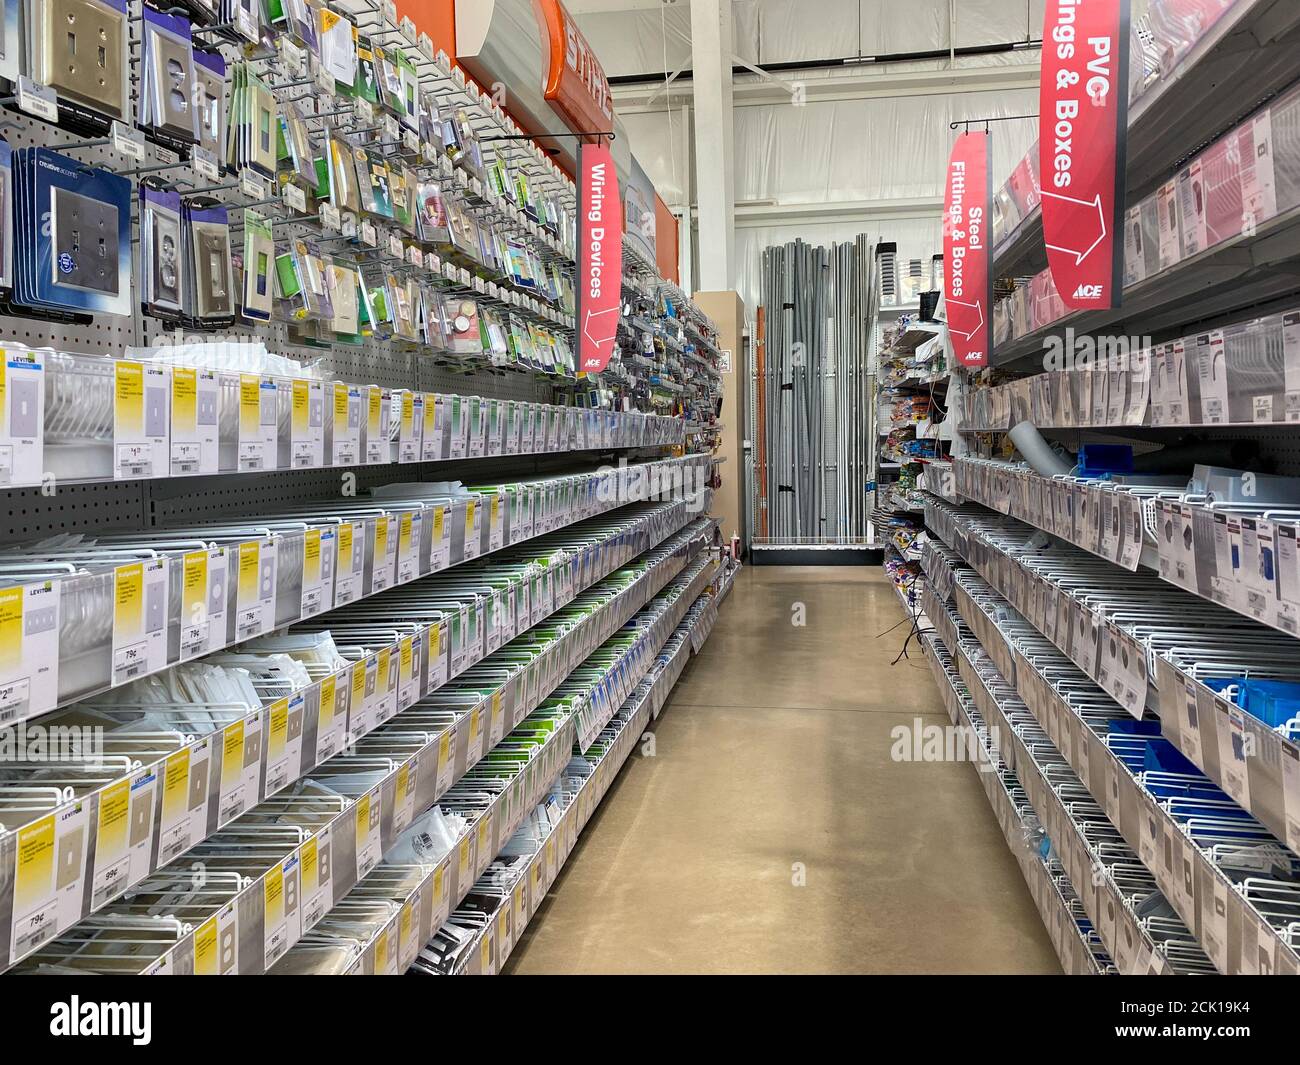 Orlando,FL/USA-9/5/20:  The wiring devices, steel fittings, and PVC fittings aisle at an Ace Hardware retail store in Orlando, Florida. Stock Photo